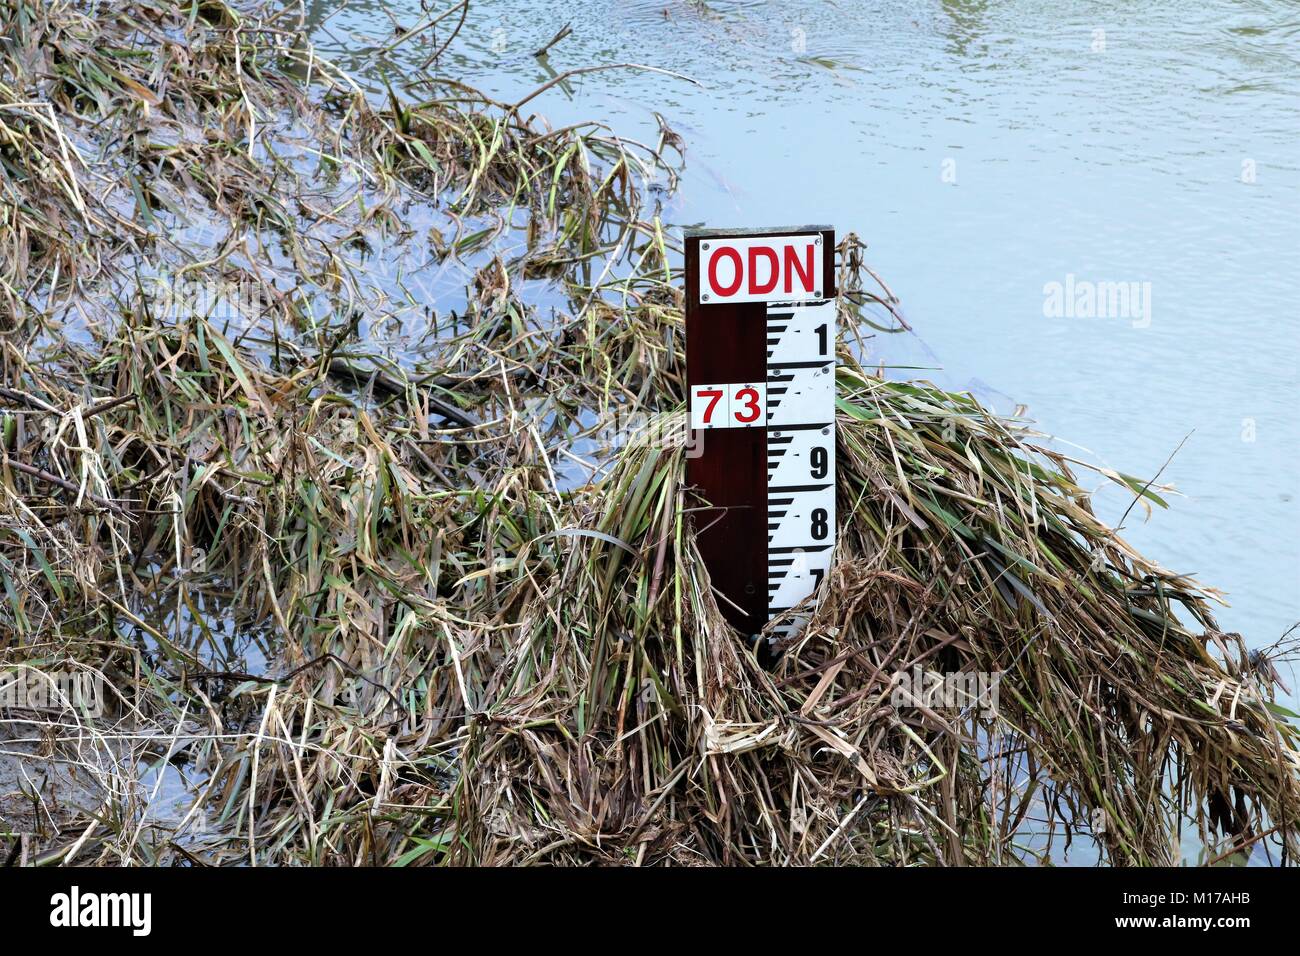 Measuring stick in river for flood alert covered in weeds and reeds Stock Photo